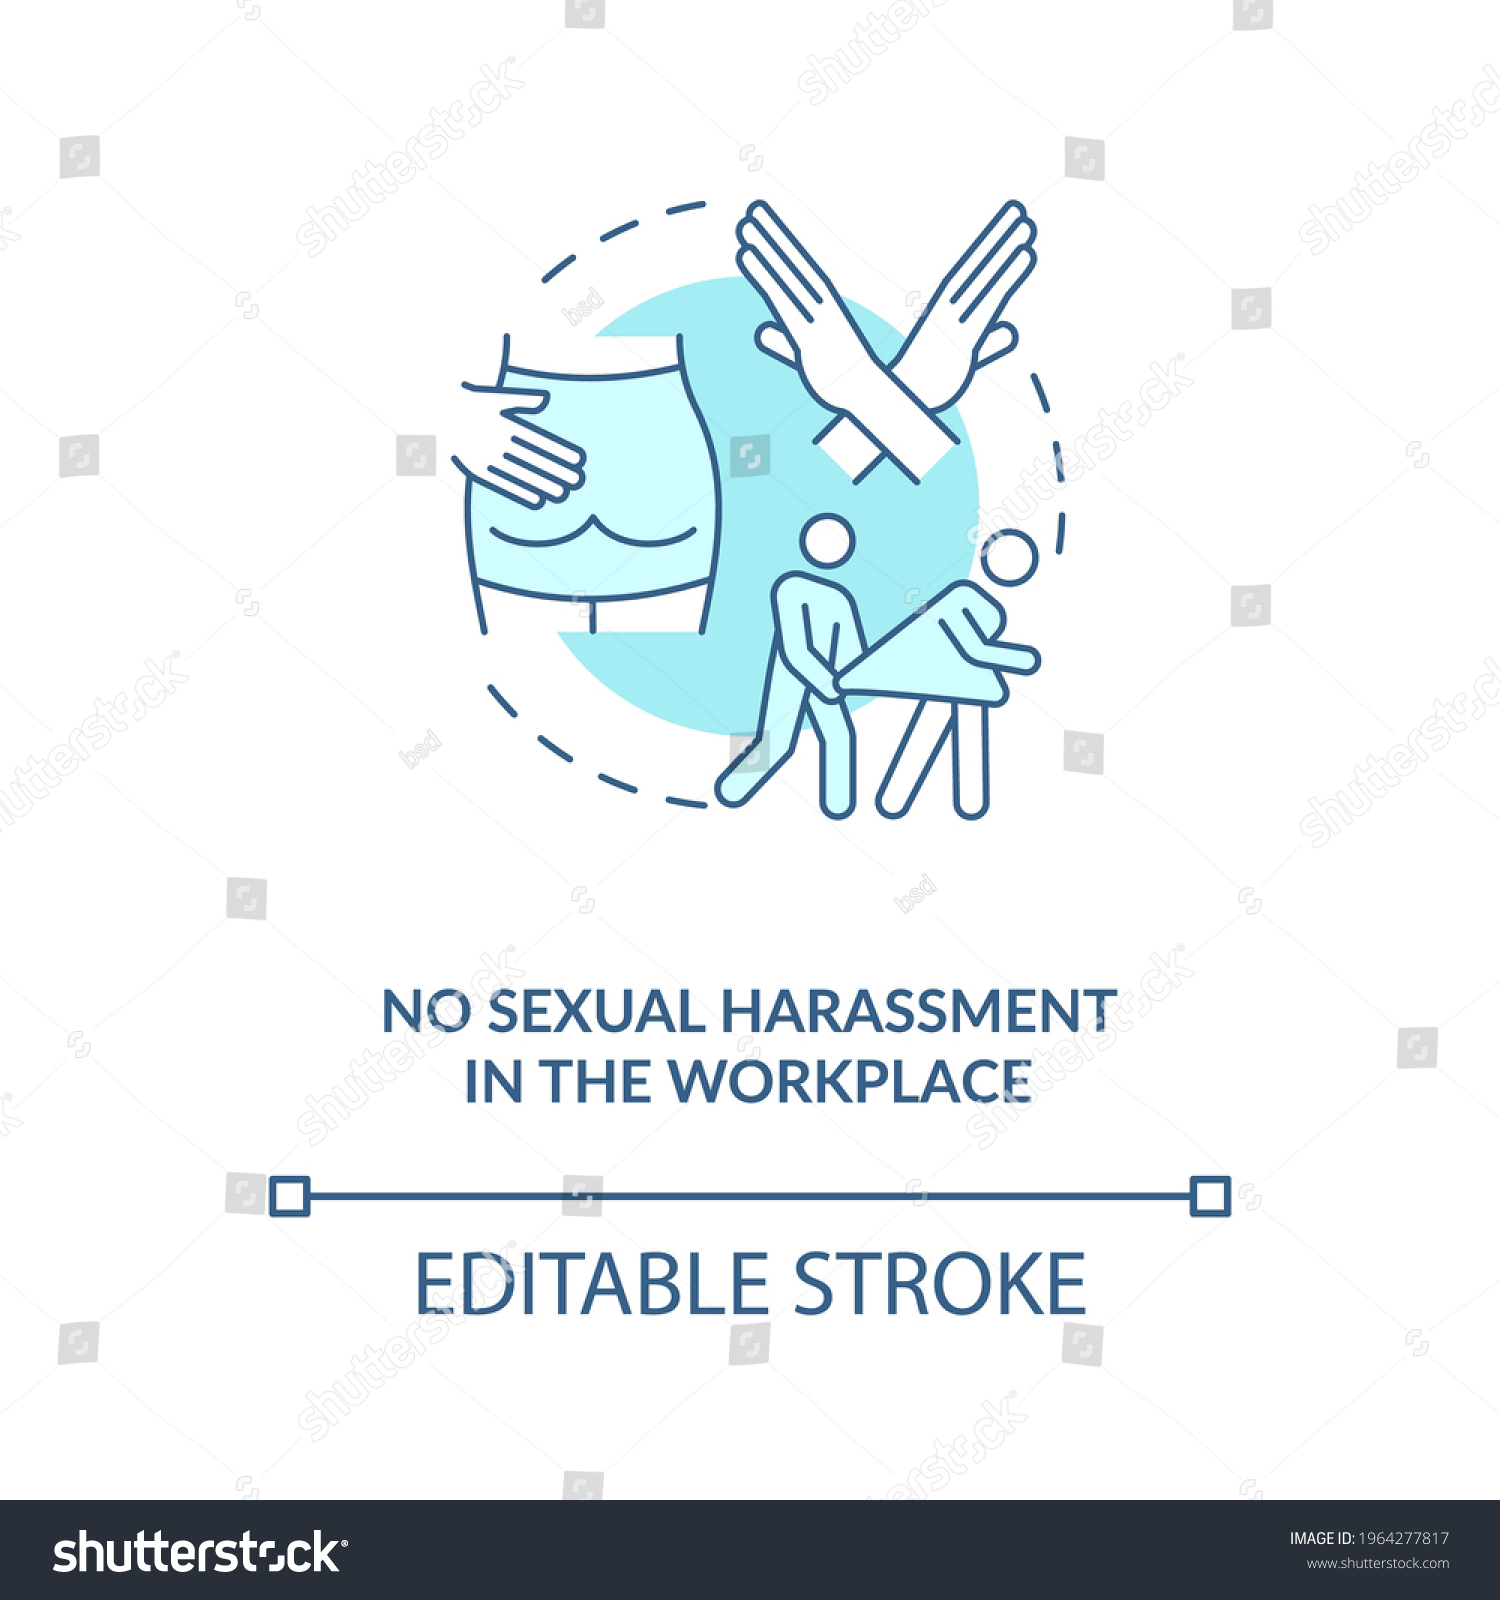 No Sexual Harassment Workplace Blue Concept Stock Vector Royalty Free 1964277817 Shutterstock 